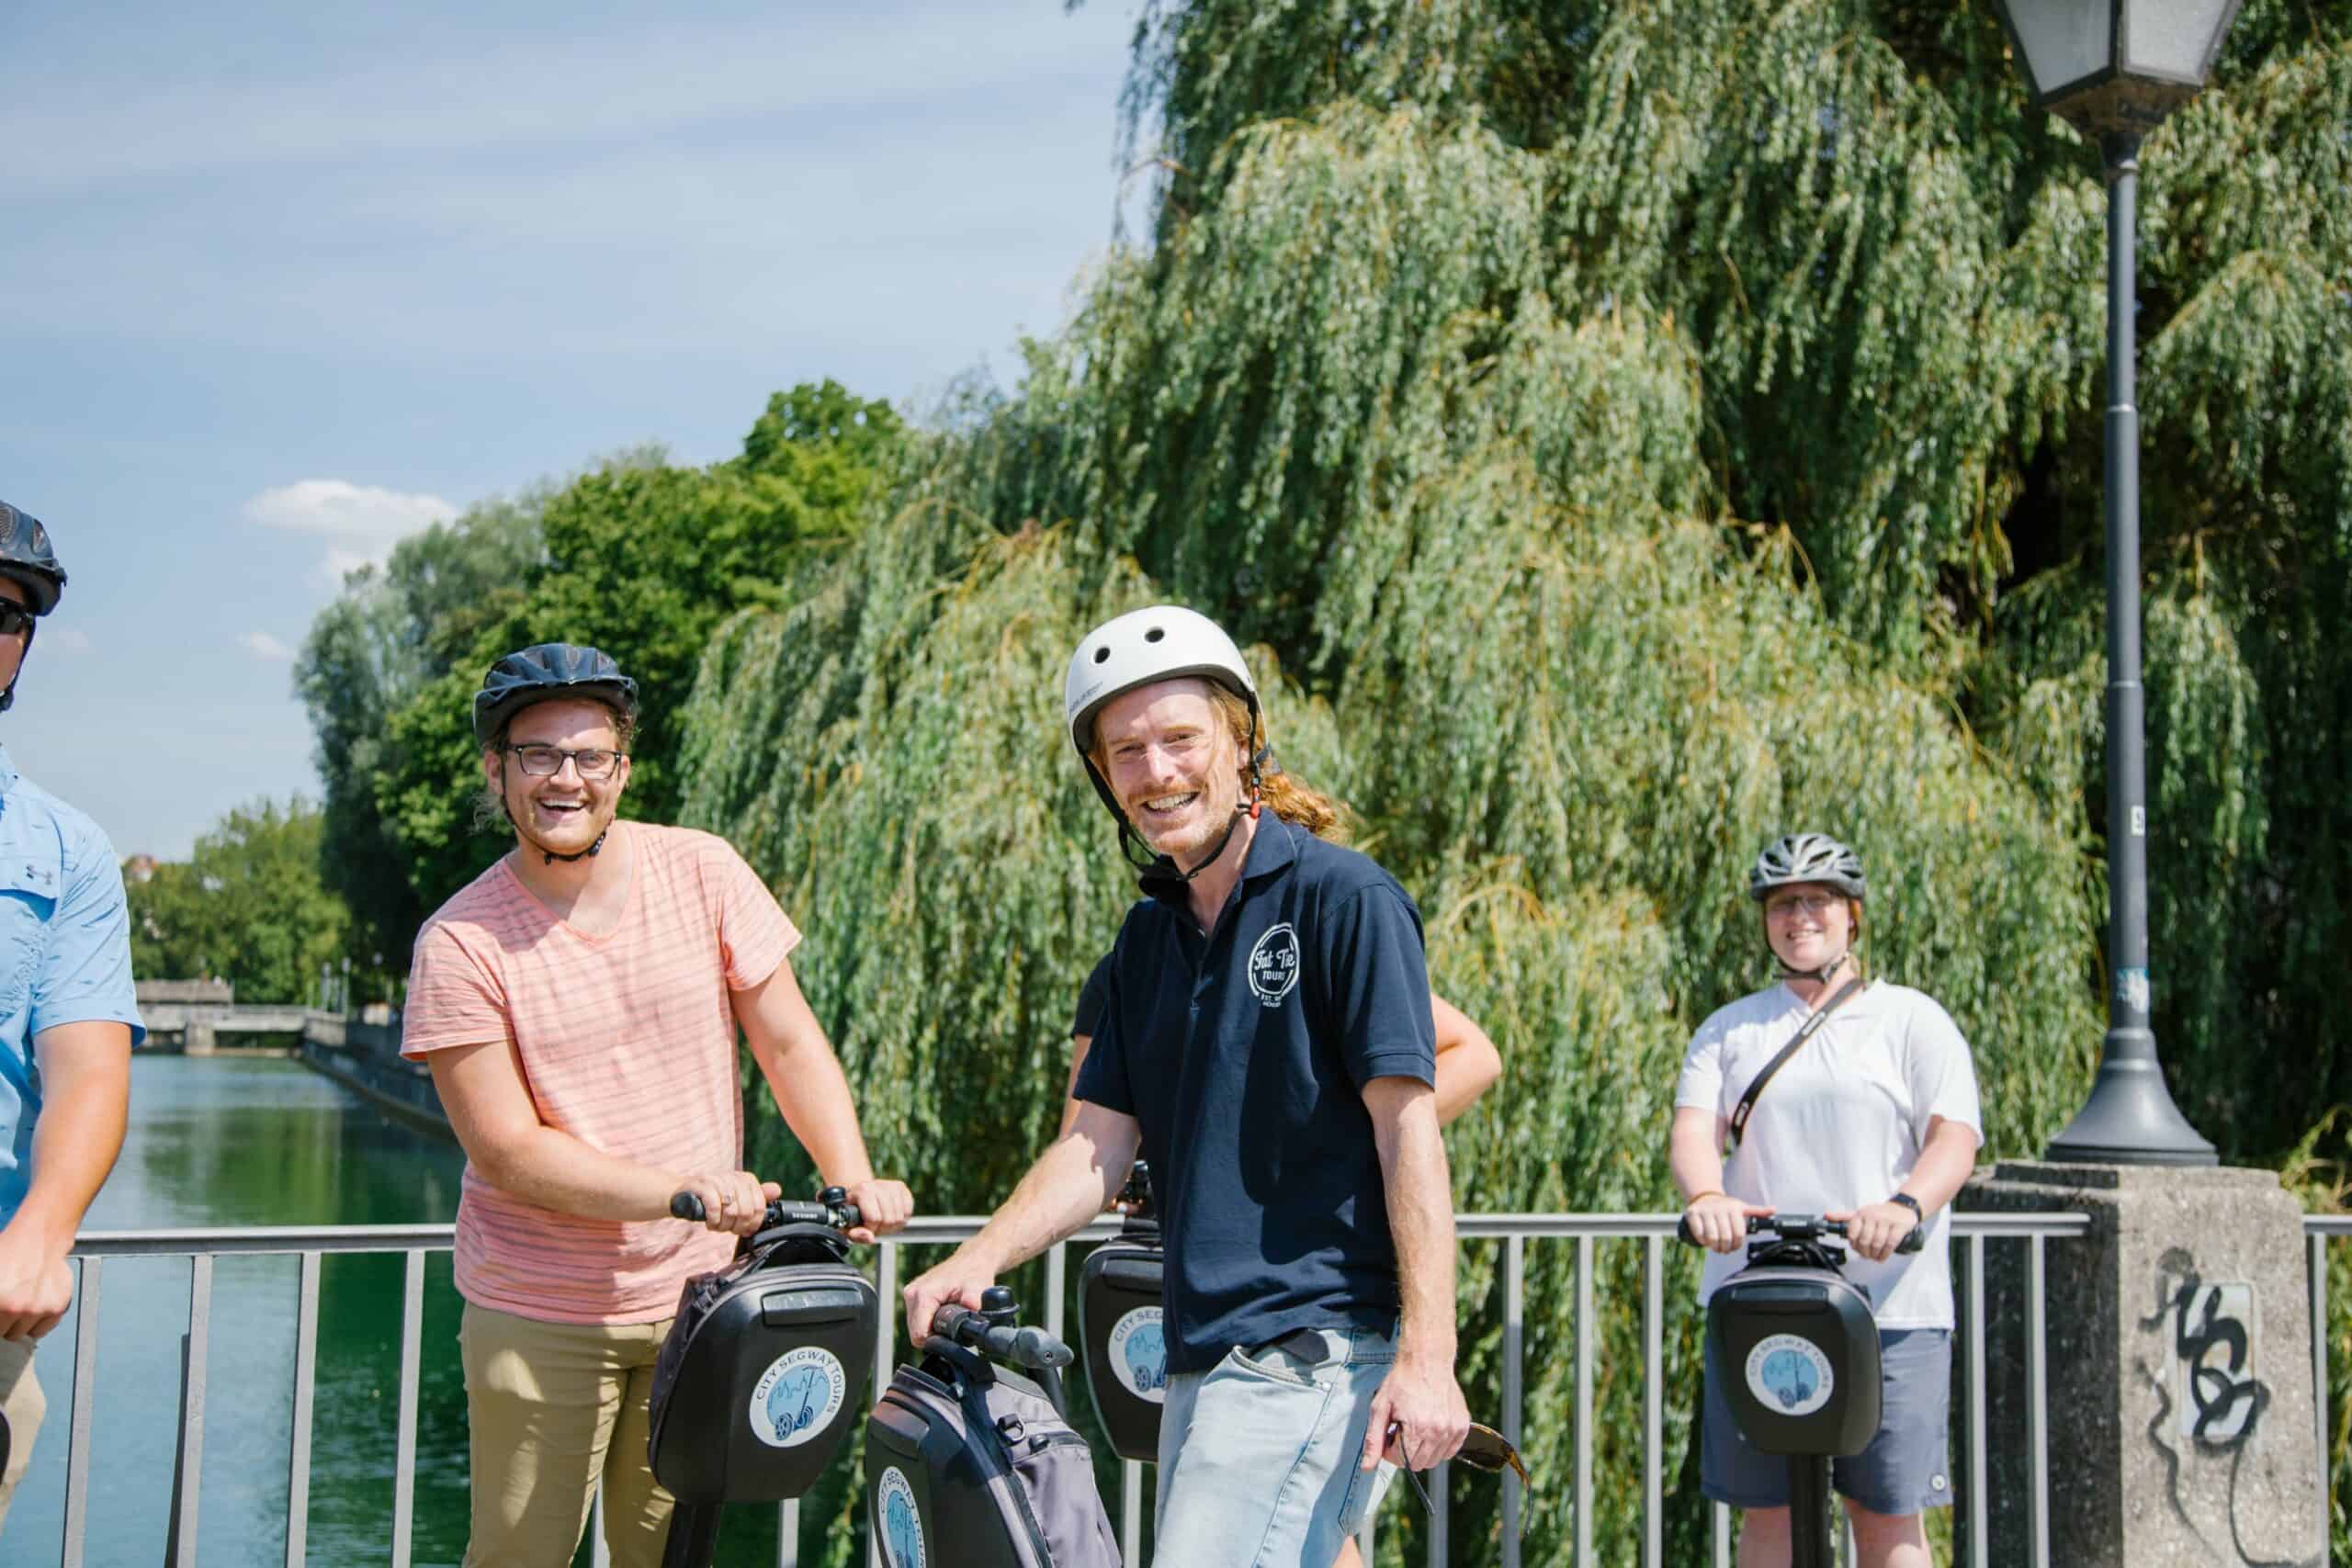 A guide and the group smile while riding Segways in Munich, Germany